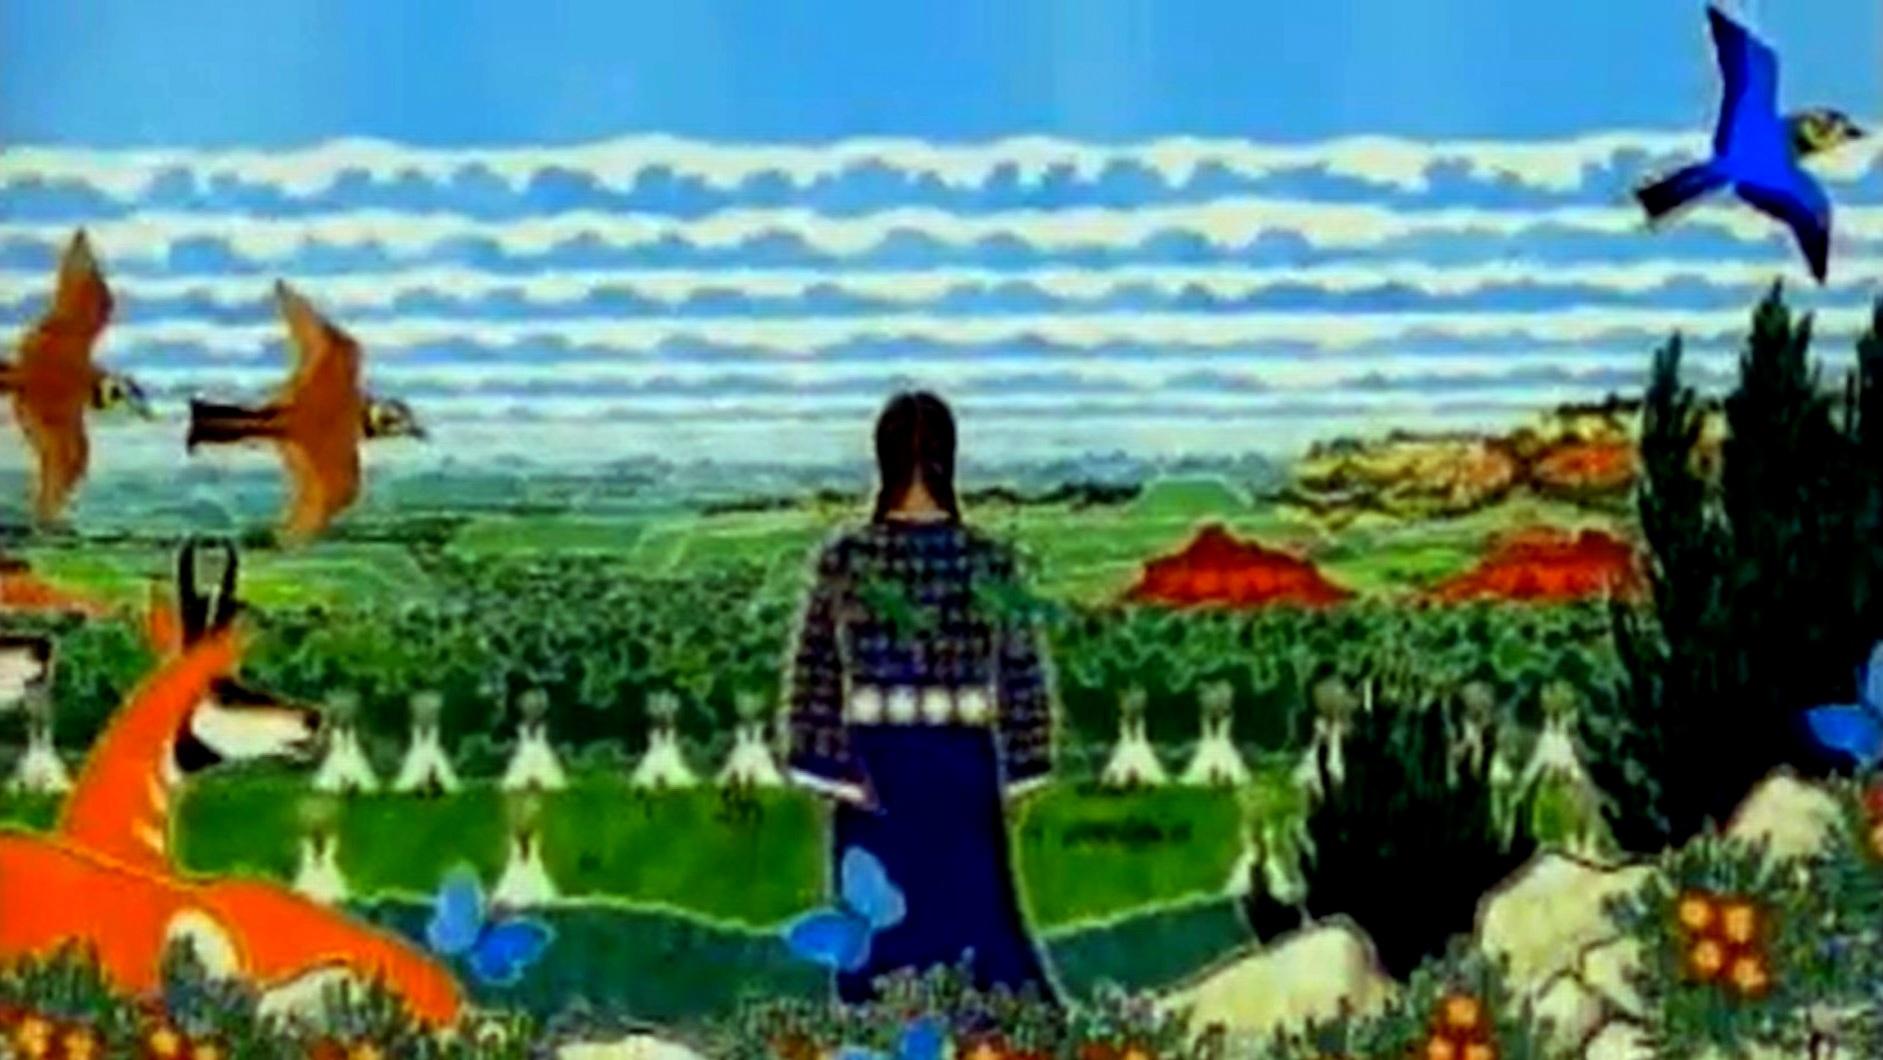 Decorative artwork of a Native American woman walking into the wilderness, with many animals present, including birds, butterflies, and antelope. 